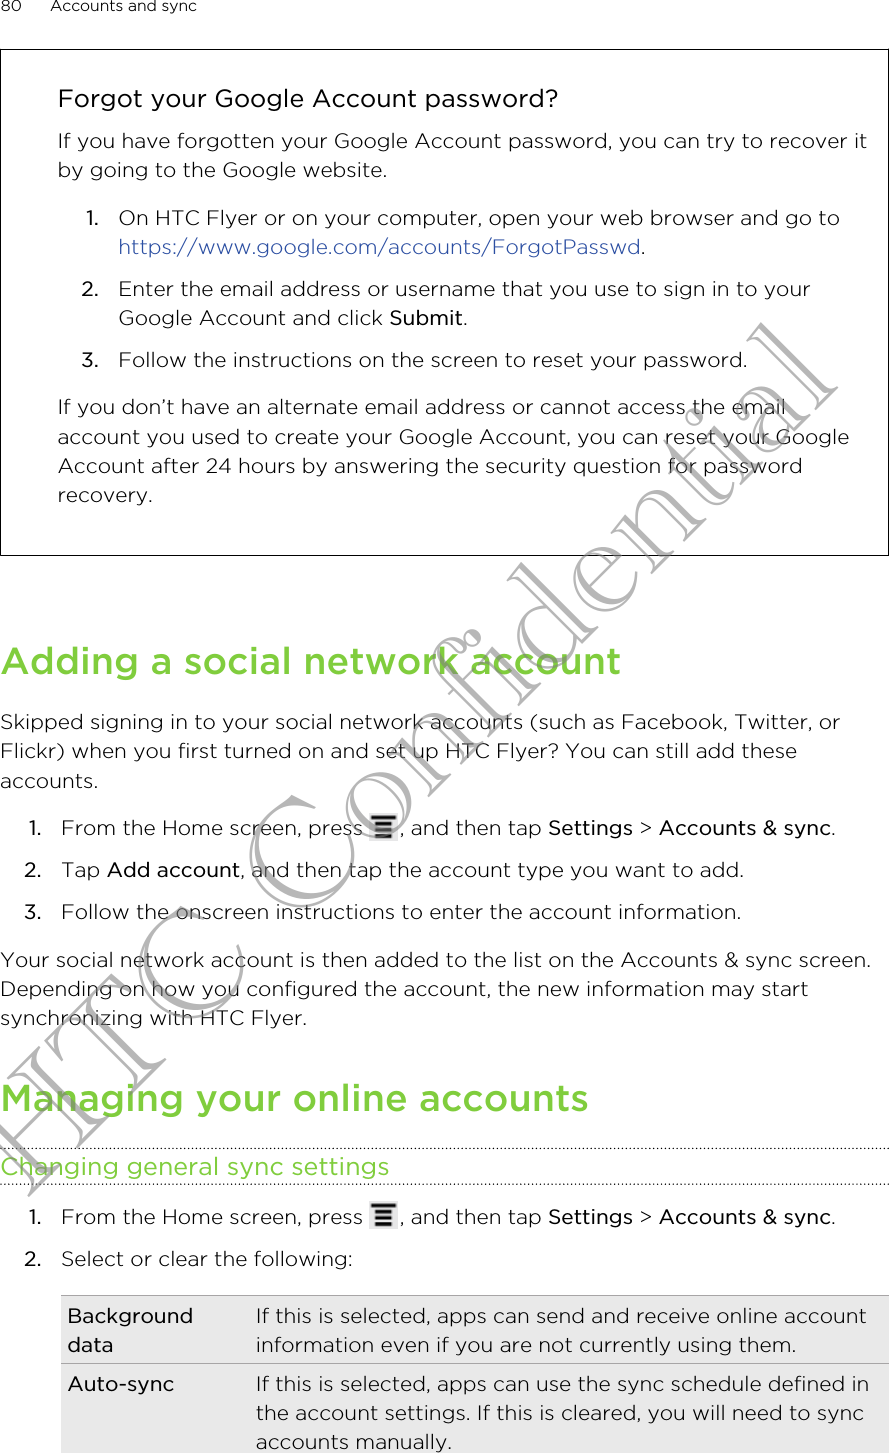 Forgot your Google Account password?If you have forgotten your Google Account password, you can try to recover itby going to the Google website.1. On HTC Flyer or on your computer, open your web browser and go to https://www.google.com/accounts/ForgotPasswd.2. Enter the email address or username that you use to sign in to yourGoogle Account and click Submit.3. Follow the instructions on the screen to reset your password.If you don’t have an alternate email address or cannot access the emailaccount you used to create your Google Account, you can reset your GoogleAccount after 24 hours by answering the security question for passwordrecovery.Adding a social network accountSkipped signing in to your social network accounts (such as Facebook, Twitter, orFlickr) when you first turned on and set up HTC Flyer? You can still add theseaccounts.1. From the Home screen, press  , and then tap Settings &gt; Accounts &amp; sync.2. Tap Add account, and then tap the account type you want to add.3. Follow the onscreen instructions to enter the account information.Your social network account is then added to the list on the Accounts &amp; sync screen.Depending on how you configured the account, the new information may startsynchronizing with HTC Flyer.Managing your online accountsChanging general sync settings1. From the Home screen, press  , and then tap Settings &gt; Accounts &amp; sync.2. Select or clear the following:BackgrounddataIf this is selected, apps can send and receive online accountinformation even if you are not currently using them.Auto-sync If this is selected, apps can use the sync schedule defined inthe account settings. If this is cleared, you will need to syncaccounts manually.80 Accounts and syncHTC Confidential